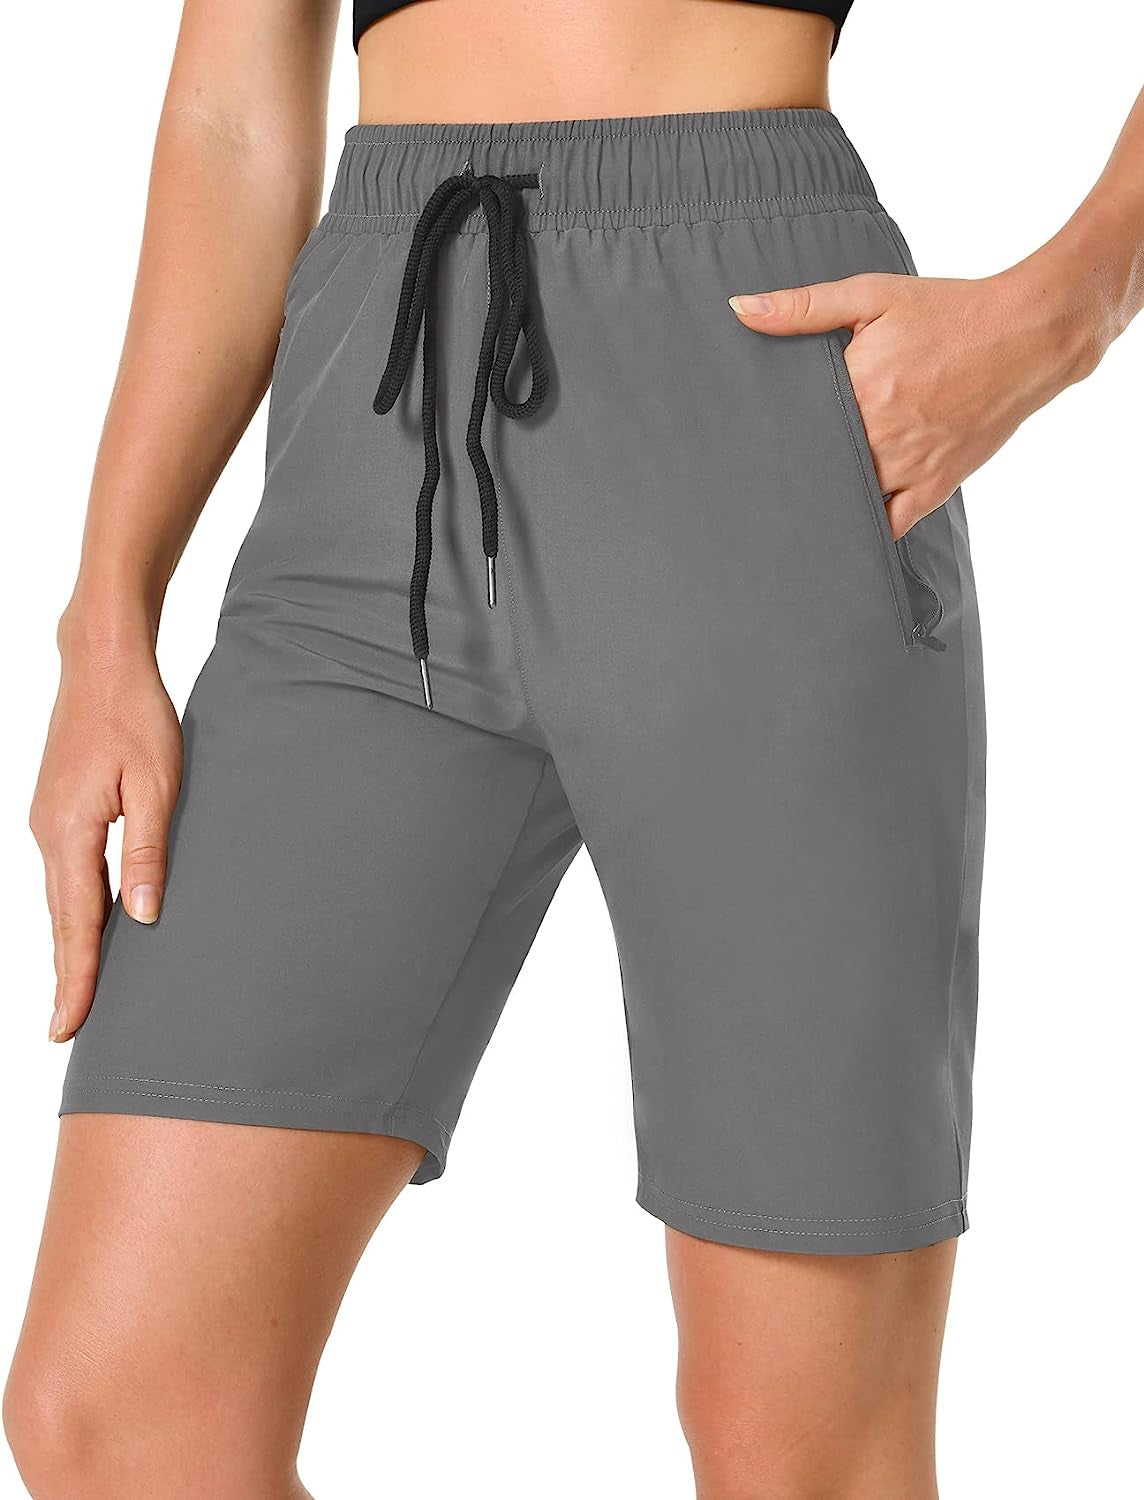 Hiking Shorts for Women Casual Summer-Womens Cargo Quick Dry Shorts with Pockets -7" Lightweight Camping Travel Golf